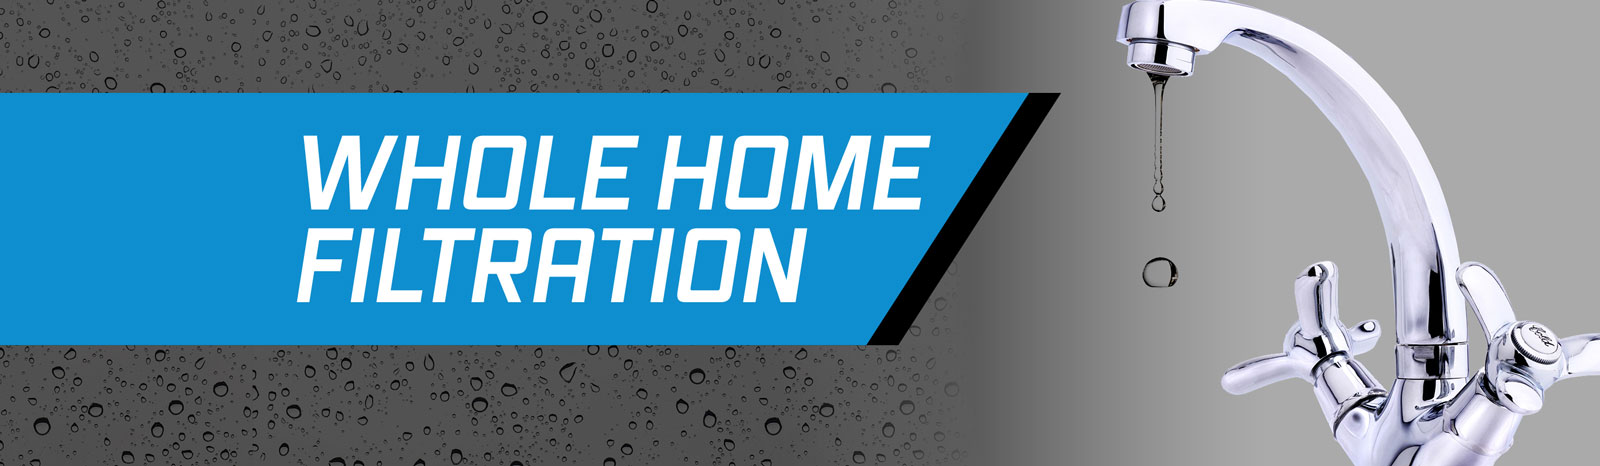 Whole Home Filtration